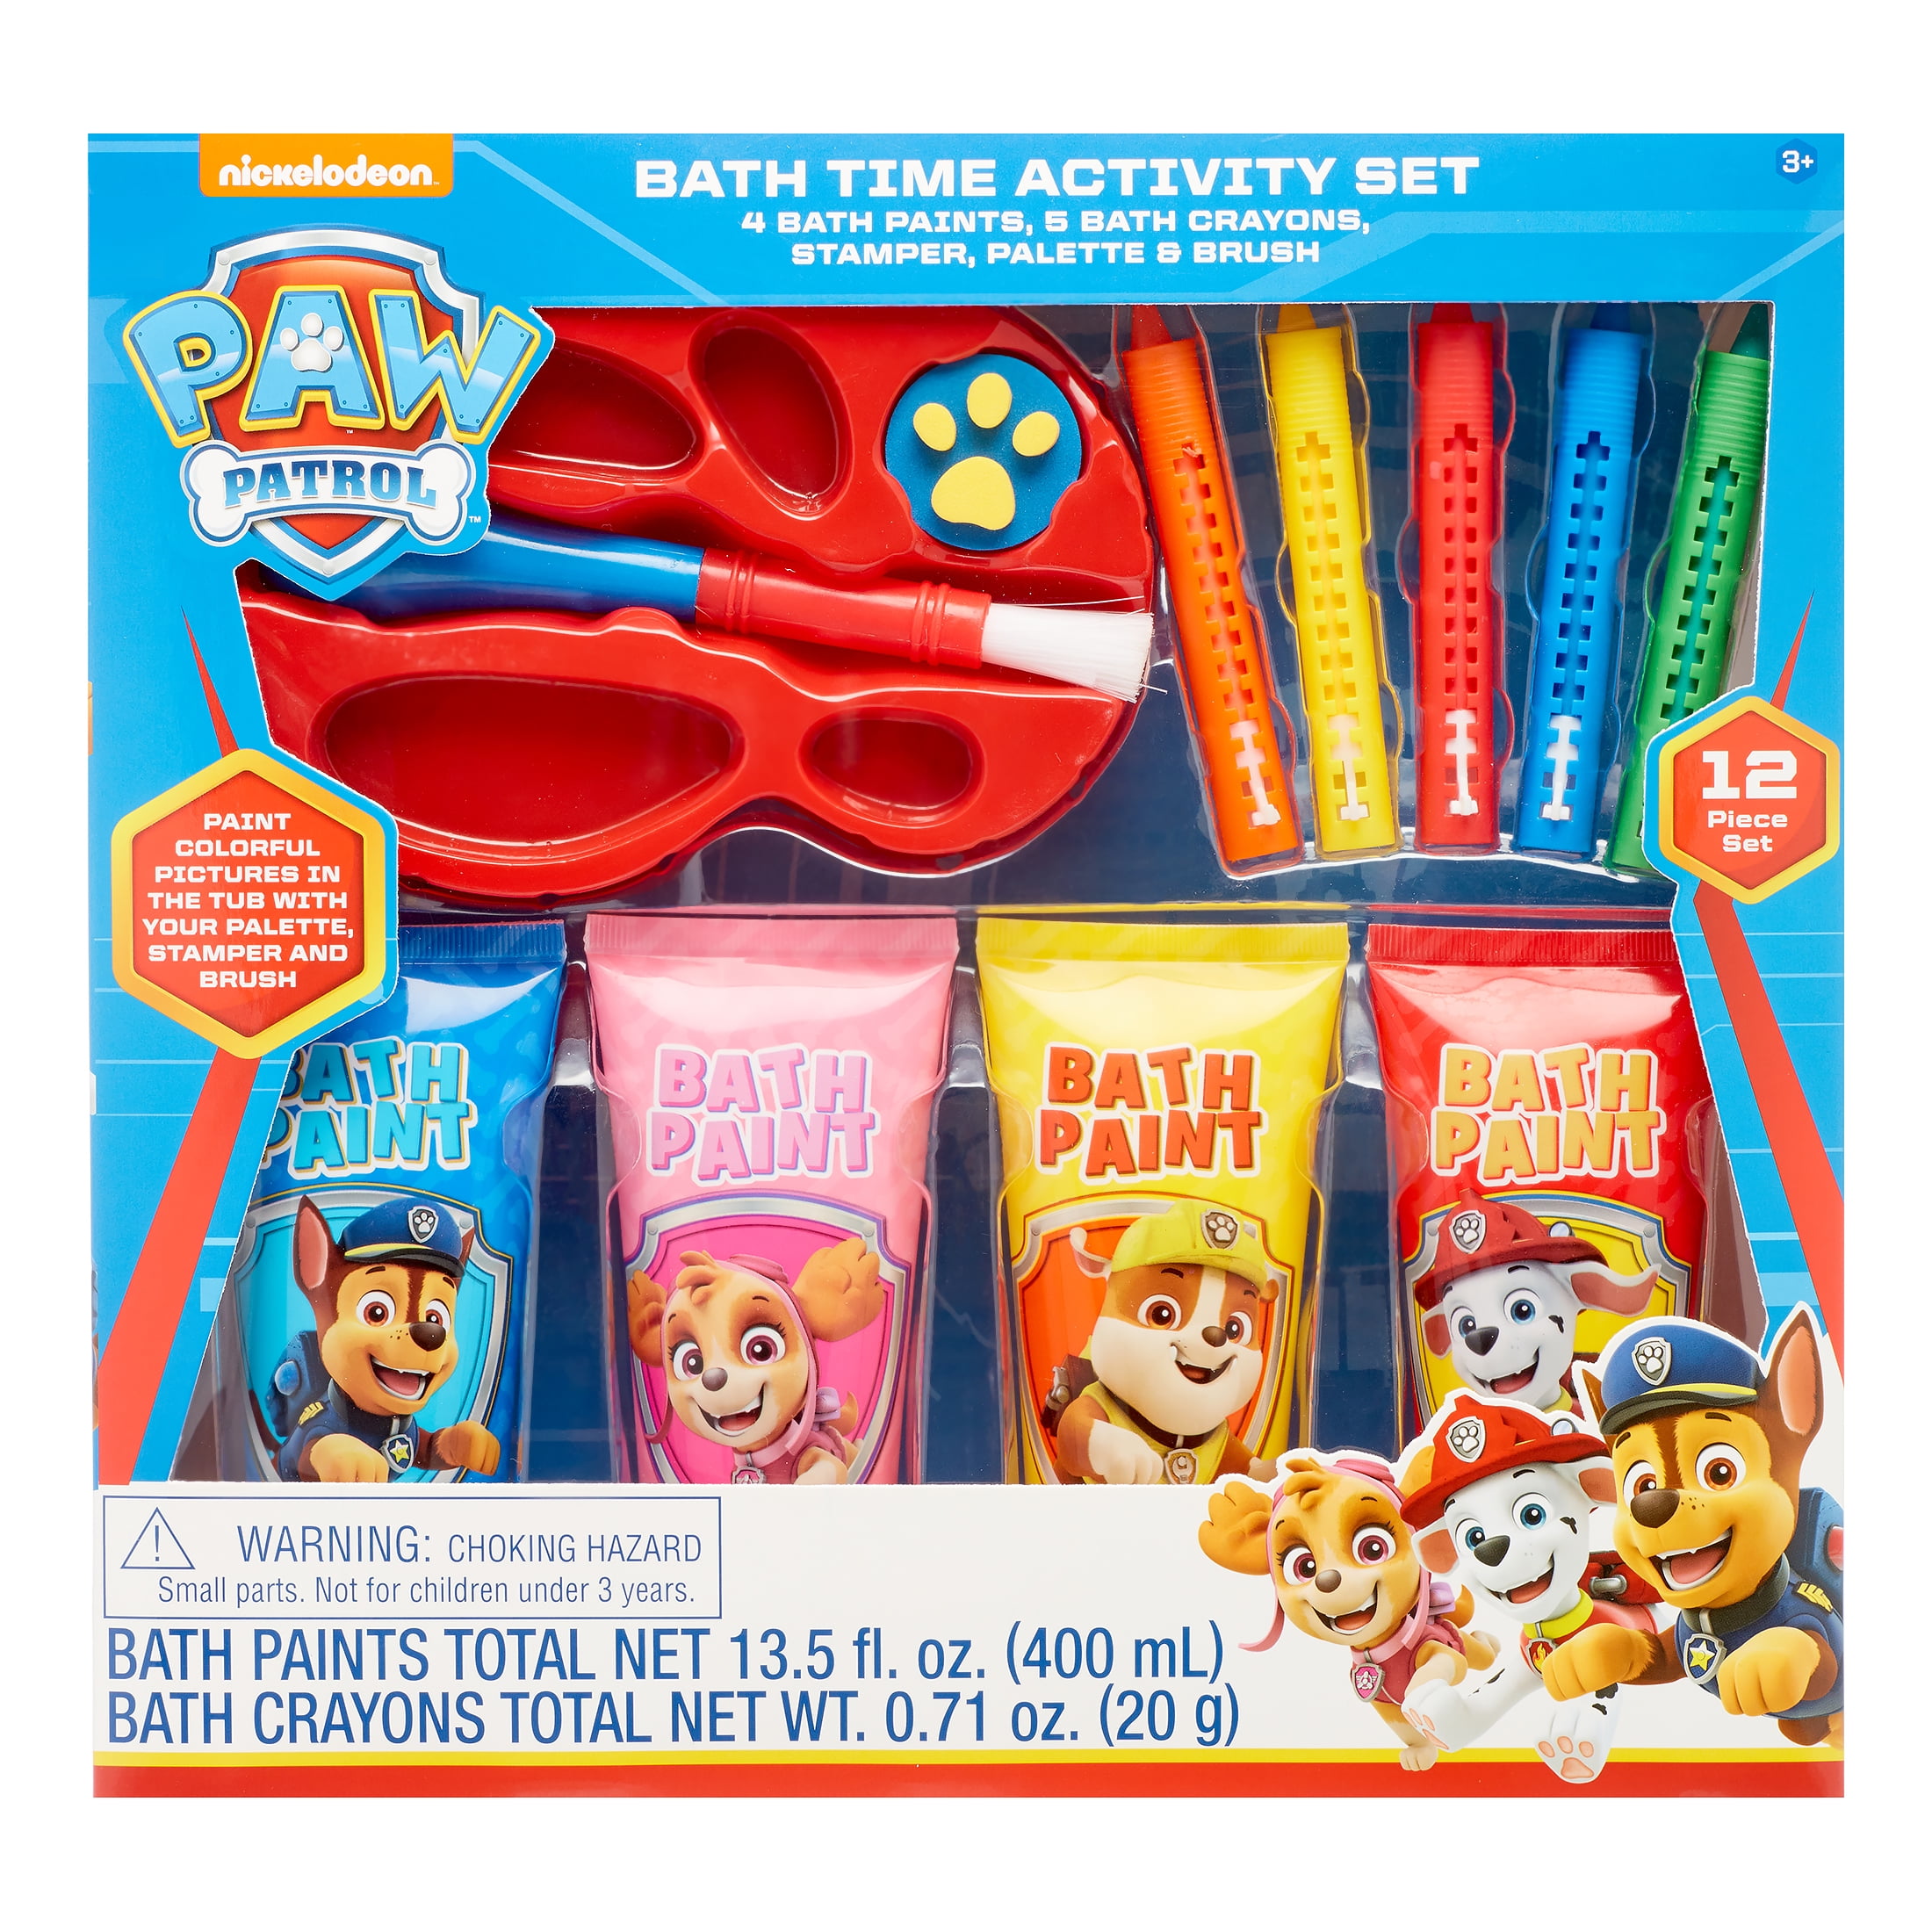 Paw Patrol Bath Set for Toddlers 1-3 - Bundle with Paw Patrol Adventure Bay  Bath Toy, Crayola Finger Paint Assorted Colors, Chase Paw Patrol Bath Toy